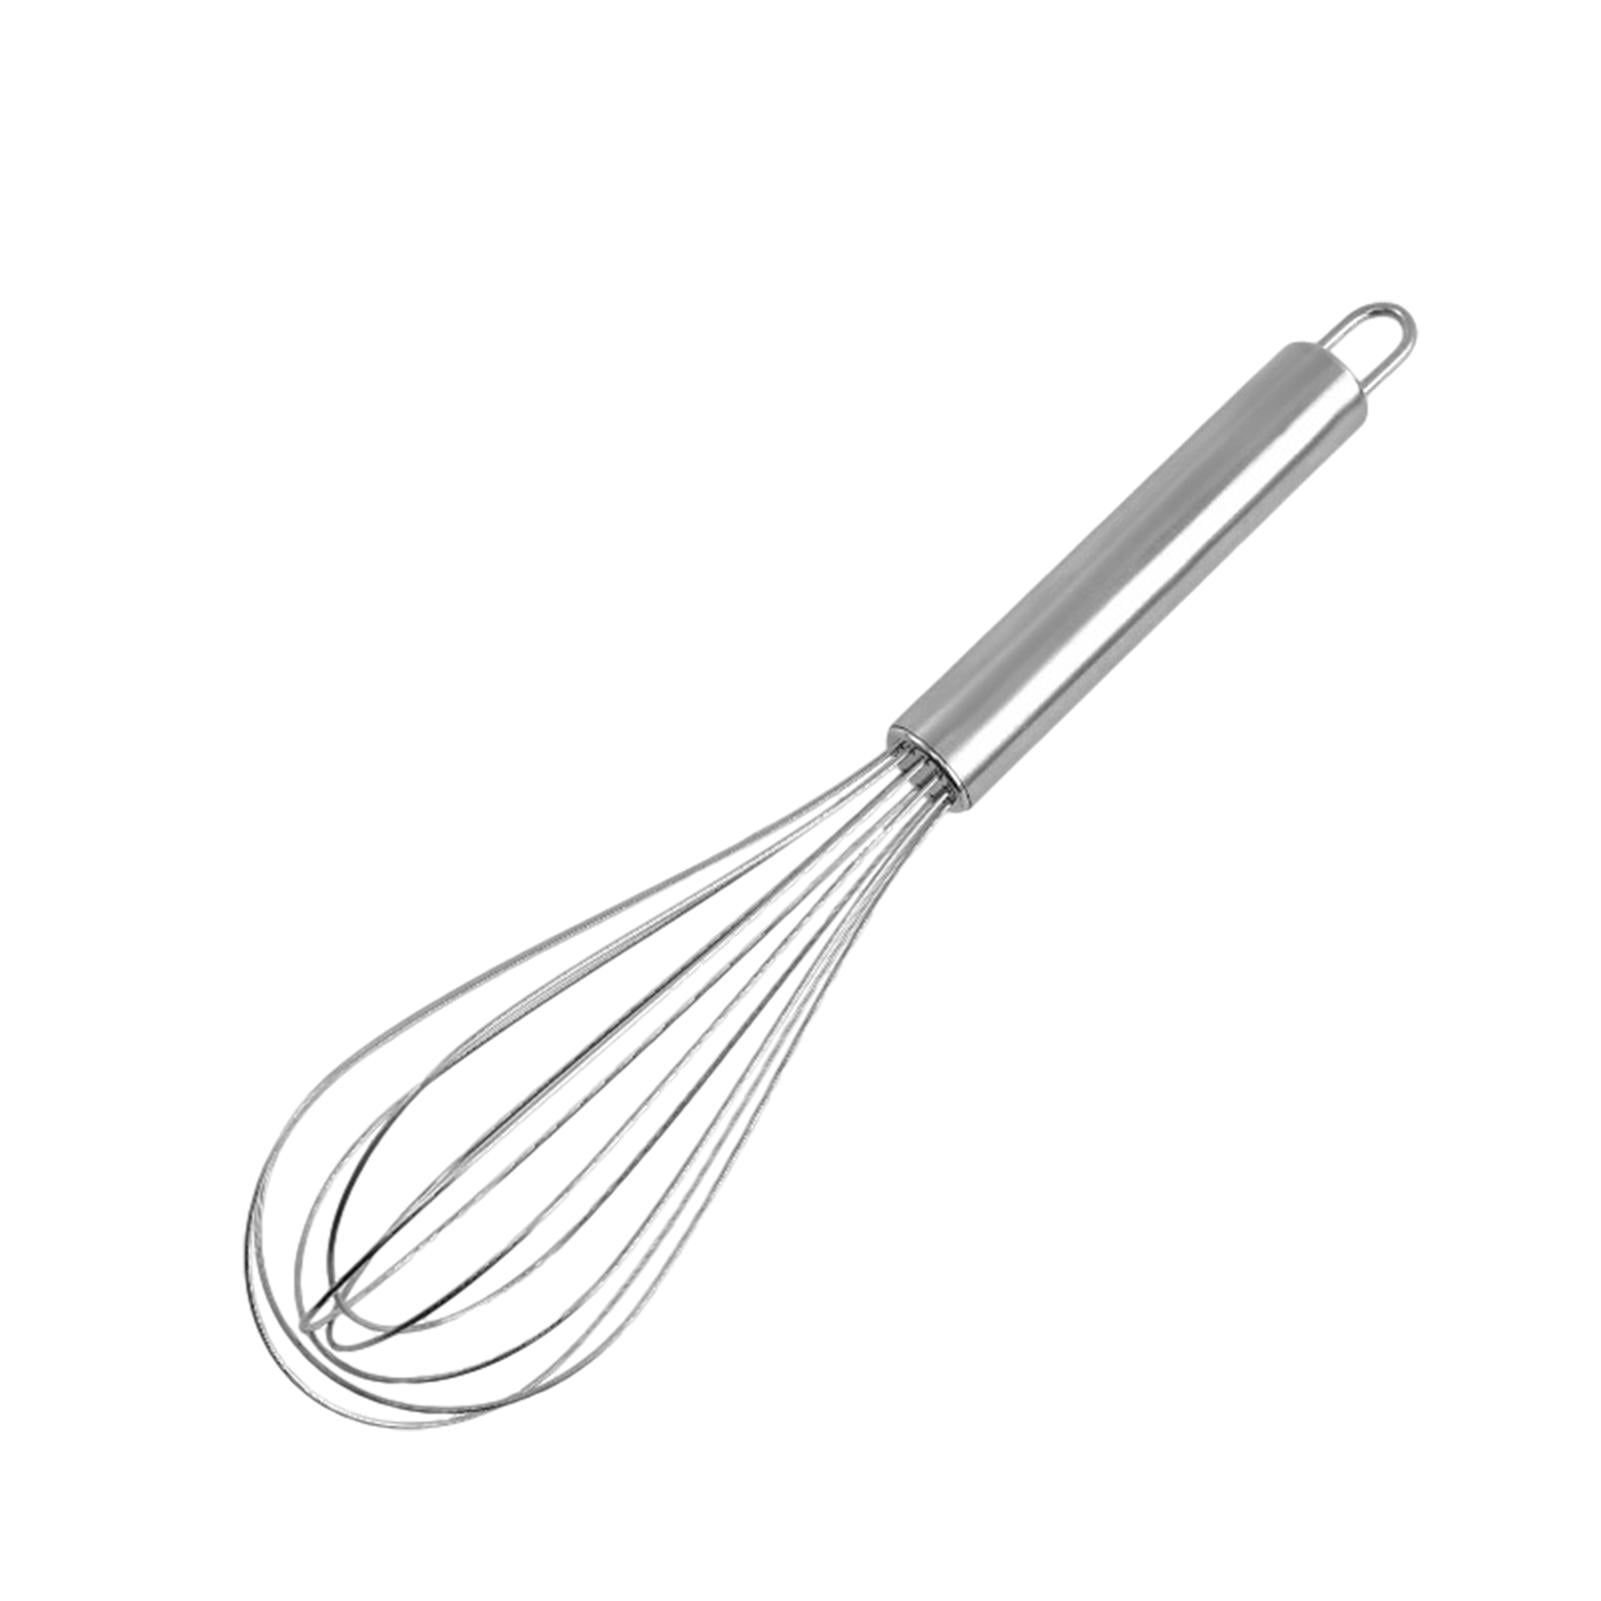 NileHome Stainless Steel Whisk Set 8 10 12 Kitchen Whisk Balloon Whisk  Kitchen Wisk Wire Whisks for Cooking, Whisking, Blending, Beating